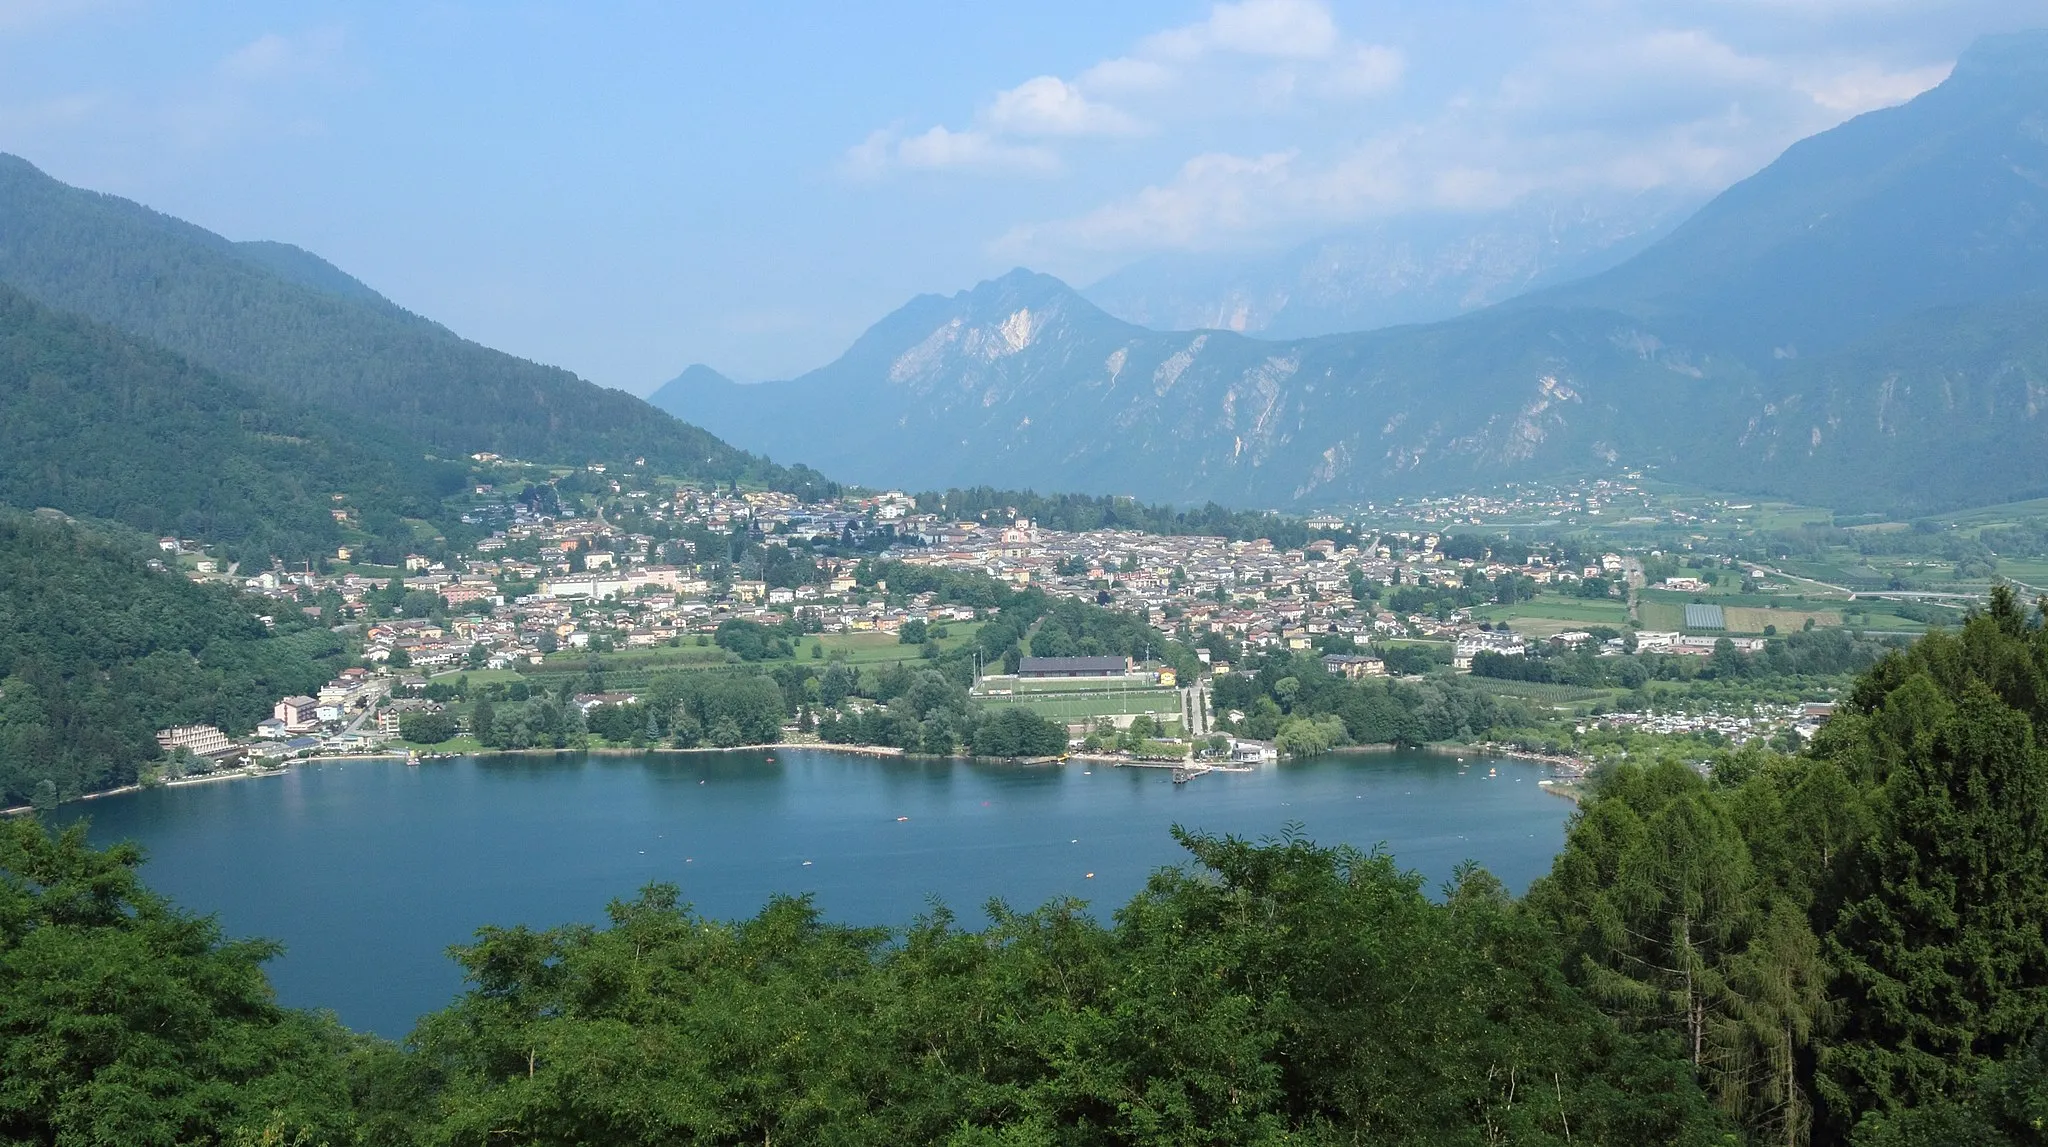 Photo showing: The town Levico Terme as seen from a path going towards Tenna, Trentine. Lake Levico is seen in the foreground.